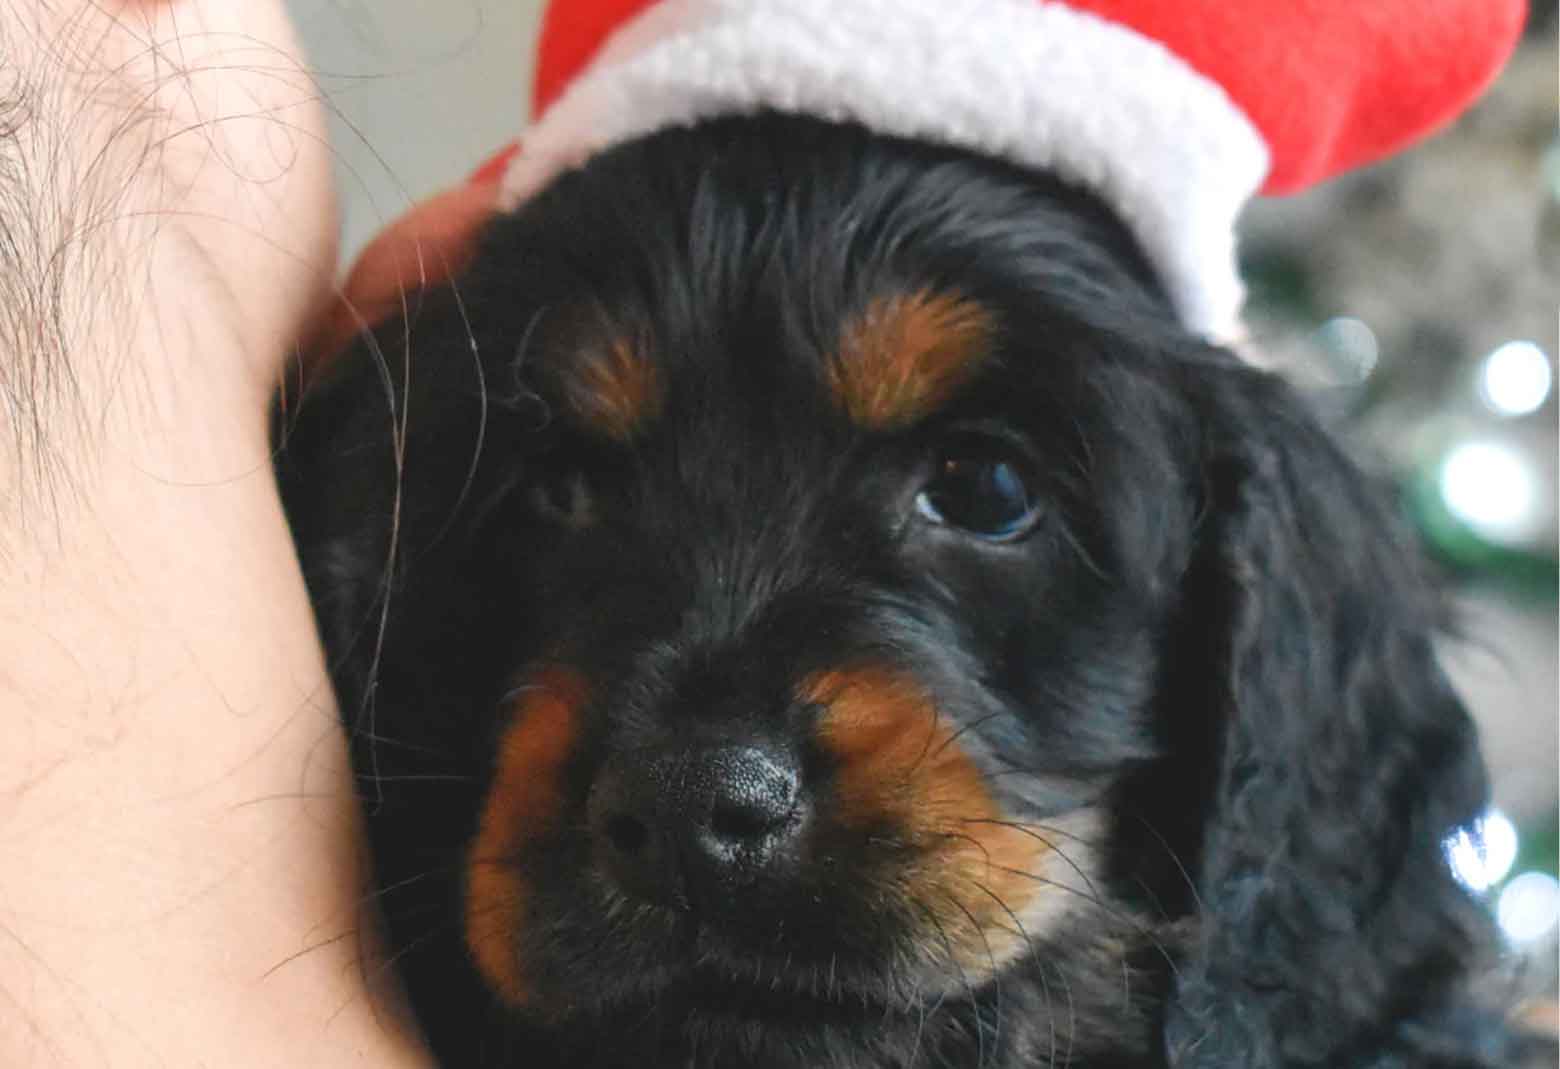 Puppy Wearing Santa Hat Being Held By Woman